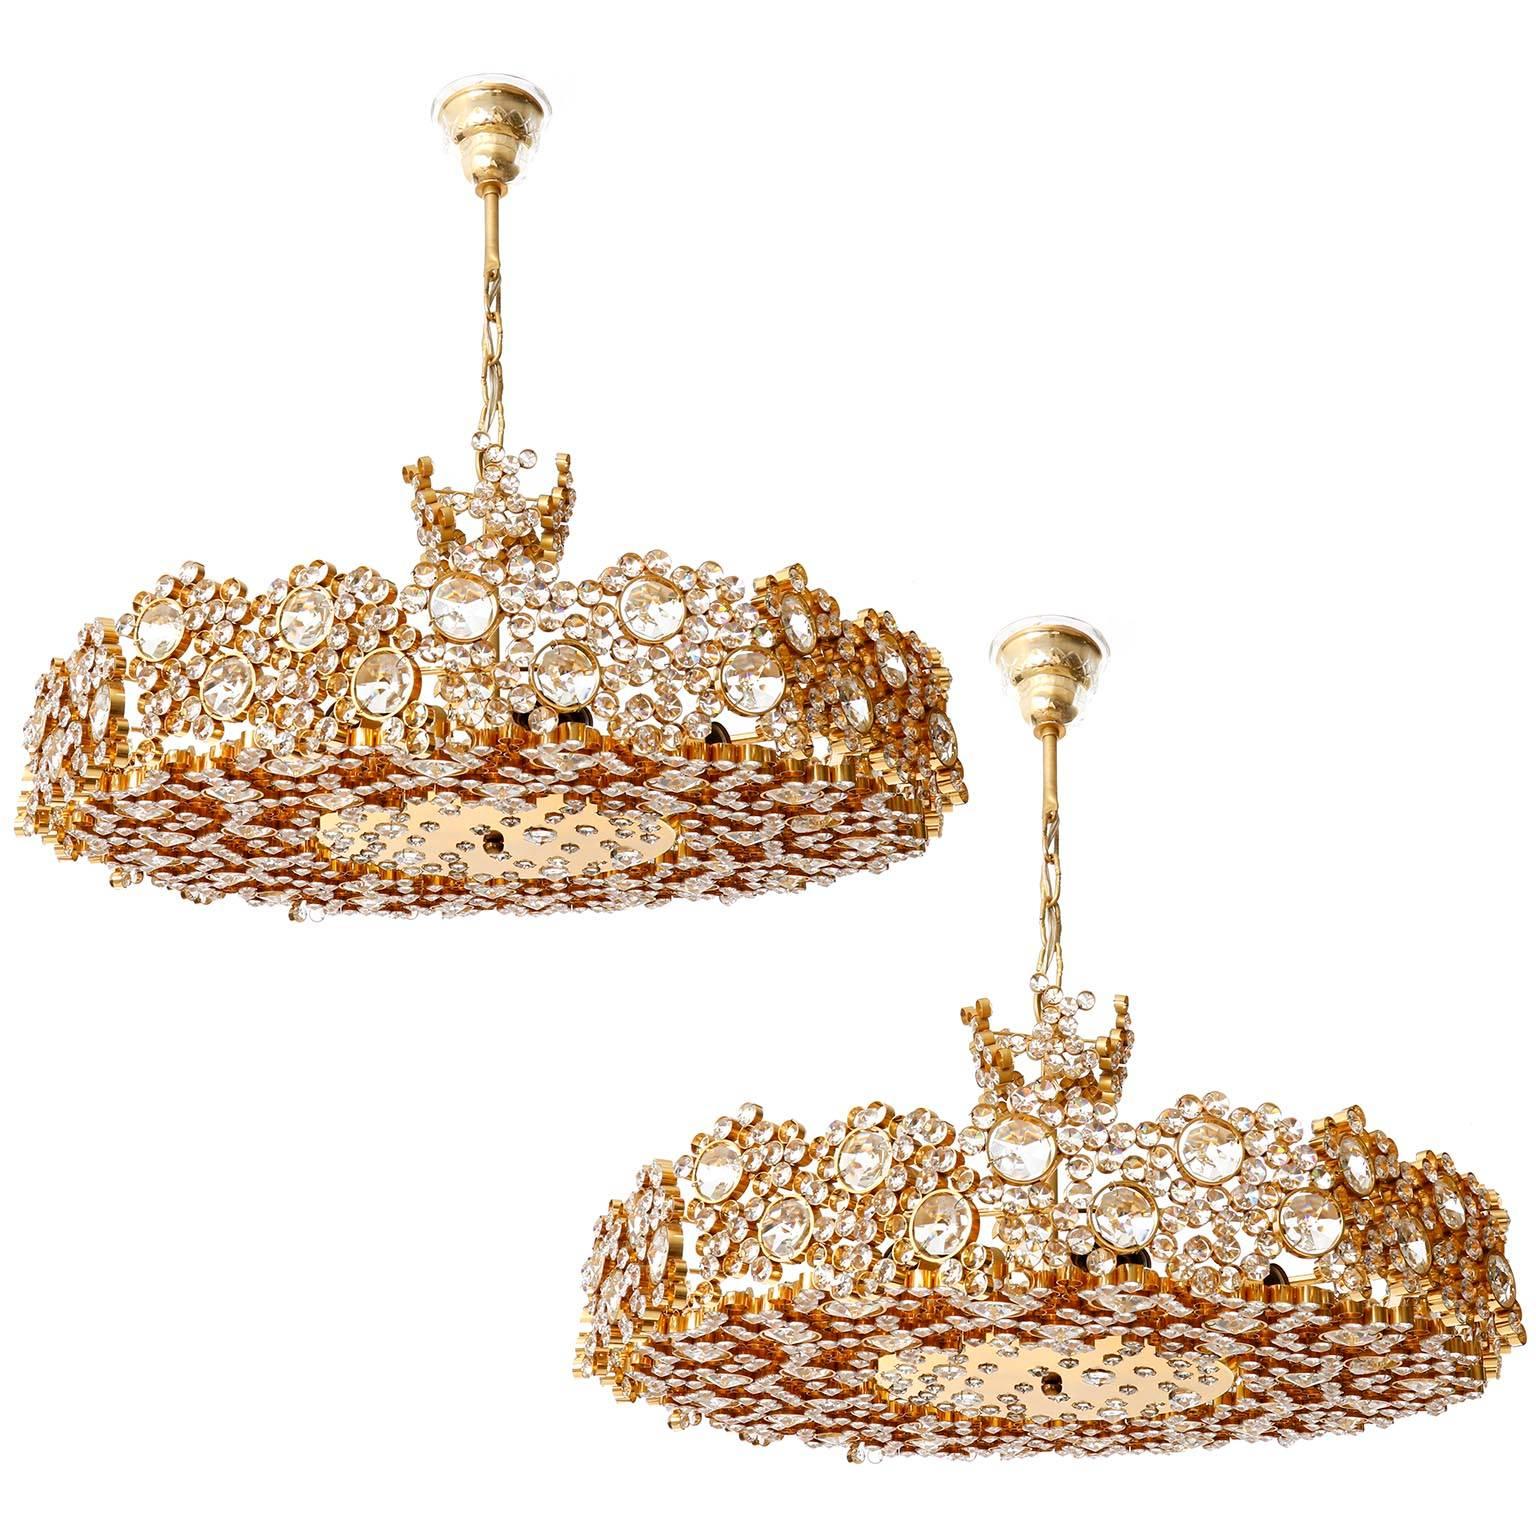 Two Palwa Chandeliers or Pendant Lights, Gilt Brass and Crystal Glass, 1970s